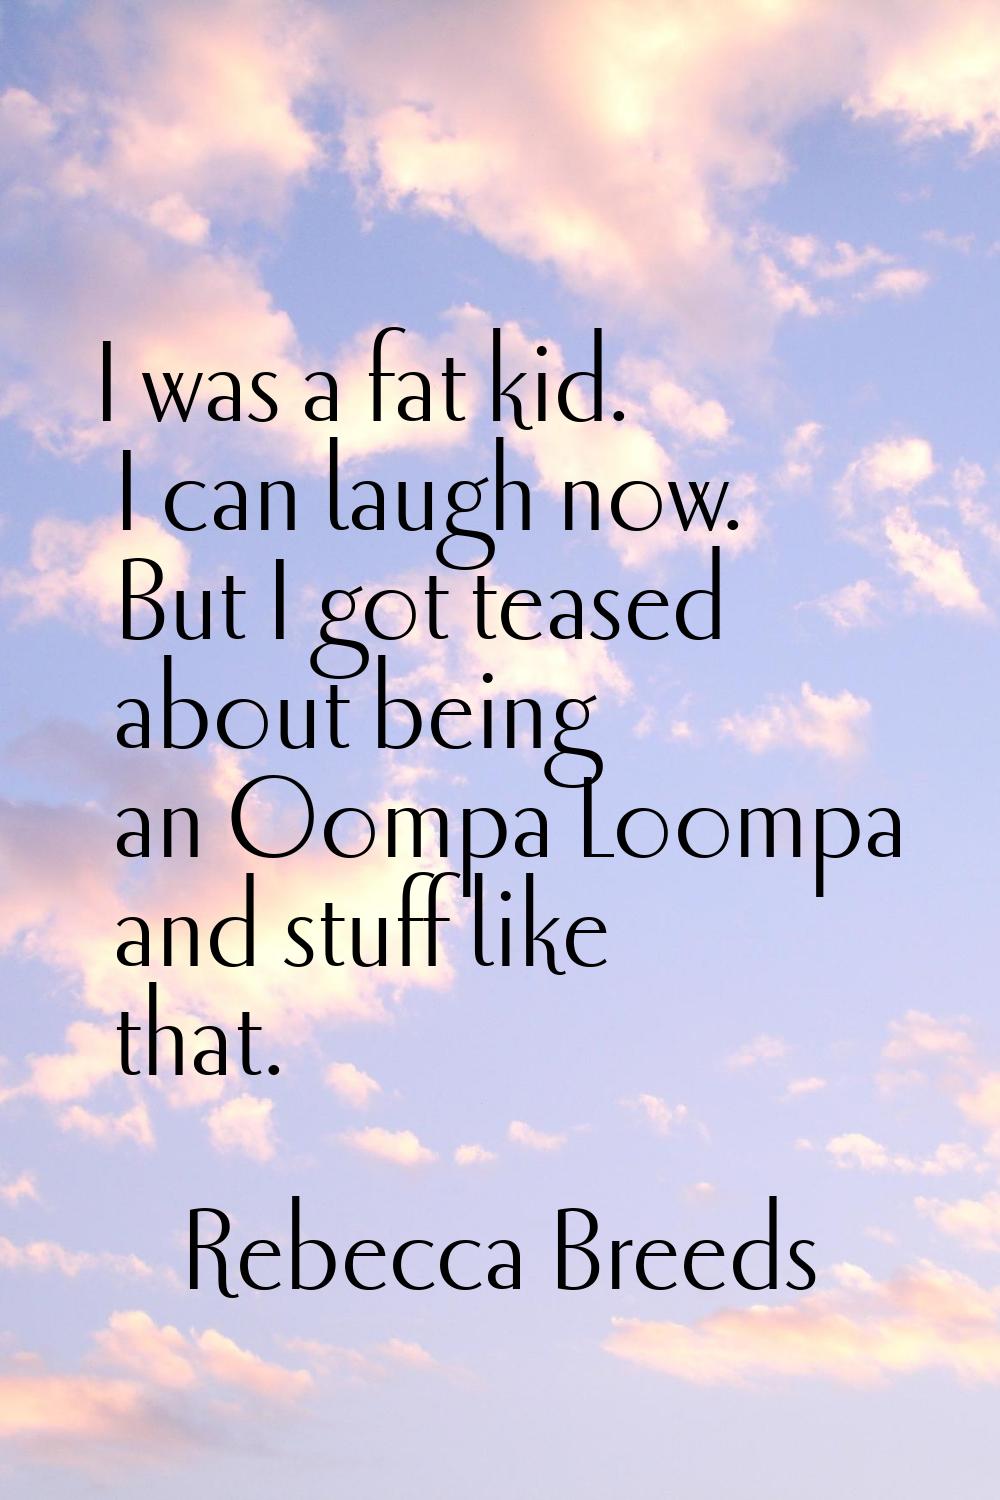 I was a fat kid. I can laugh now. But I got teased about being an Oompa Loompa and stuff like that.